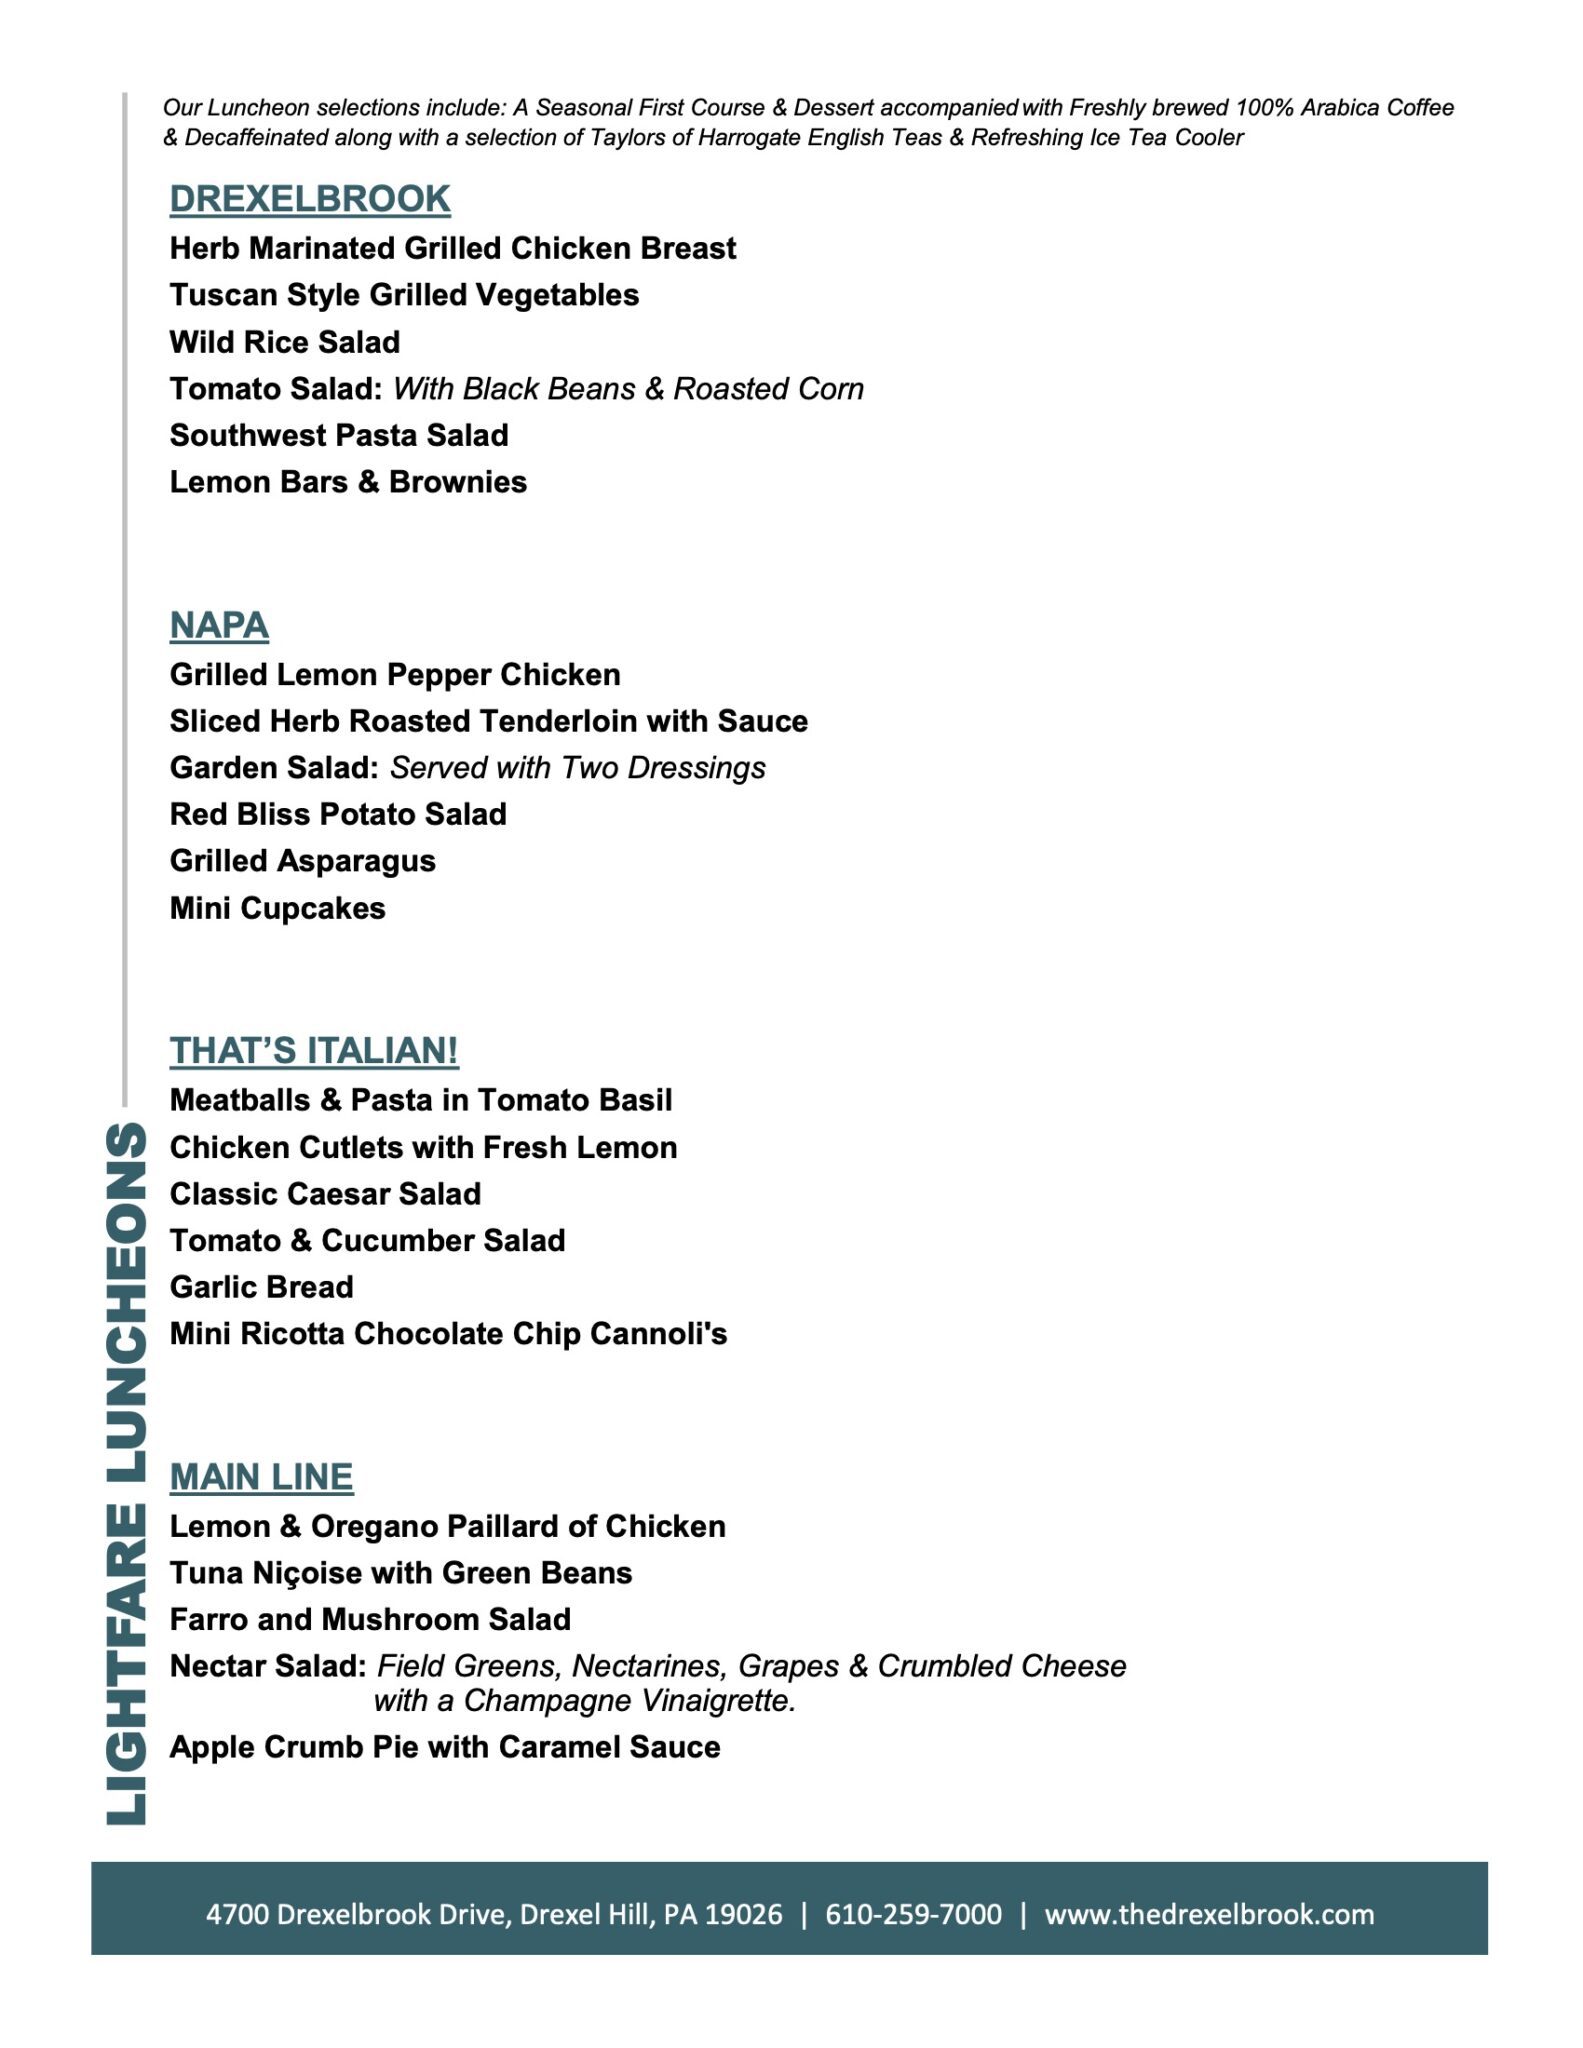 Drexelbrook catering menu for luncheons